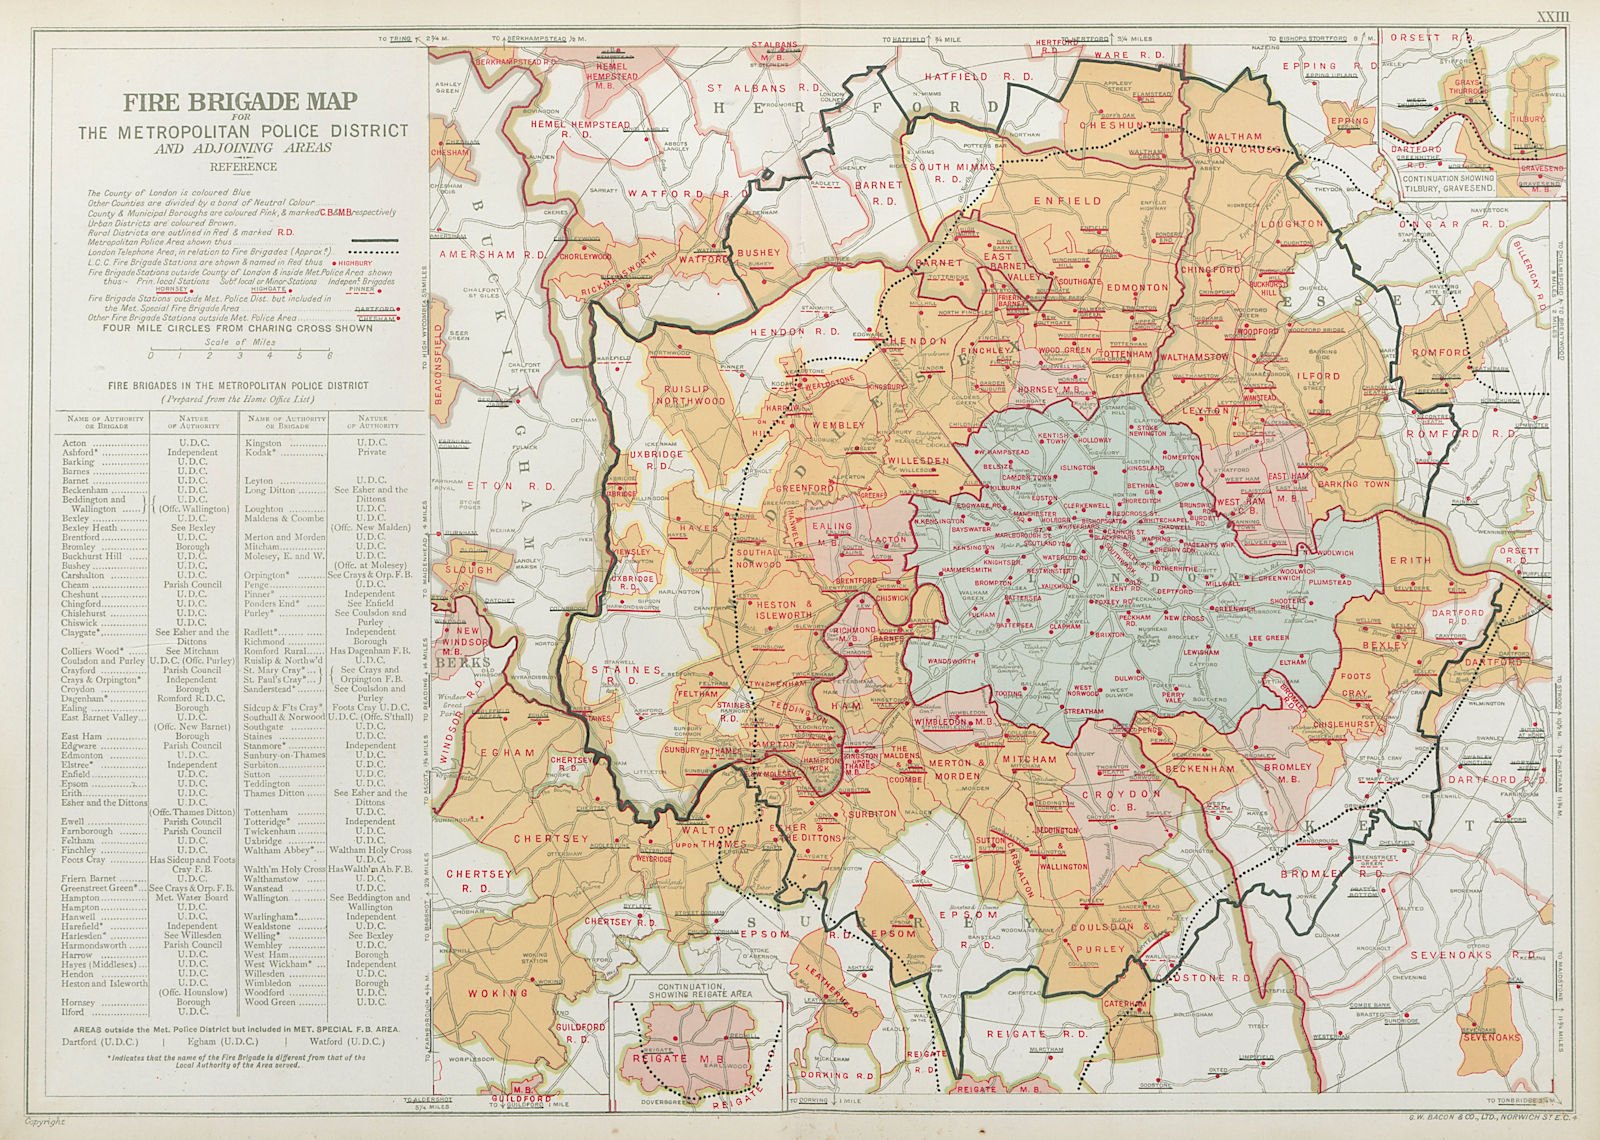 LONDON FIRE BRIGADE. Showing Fire Brigade Stations. Vintage map. BACON 1920